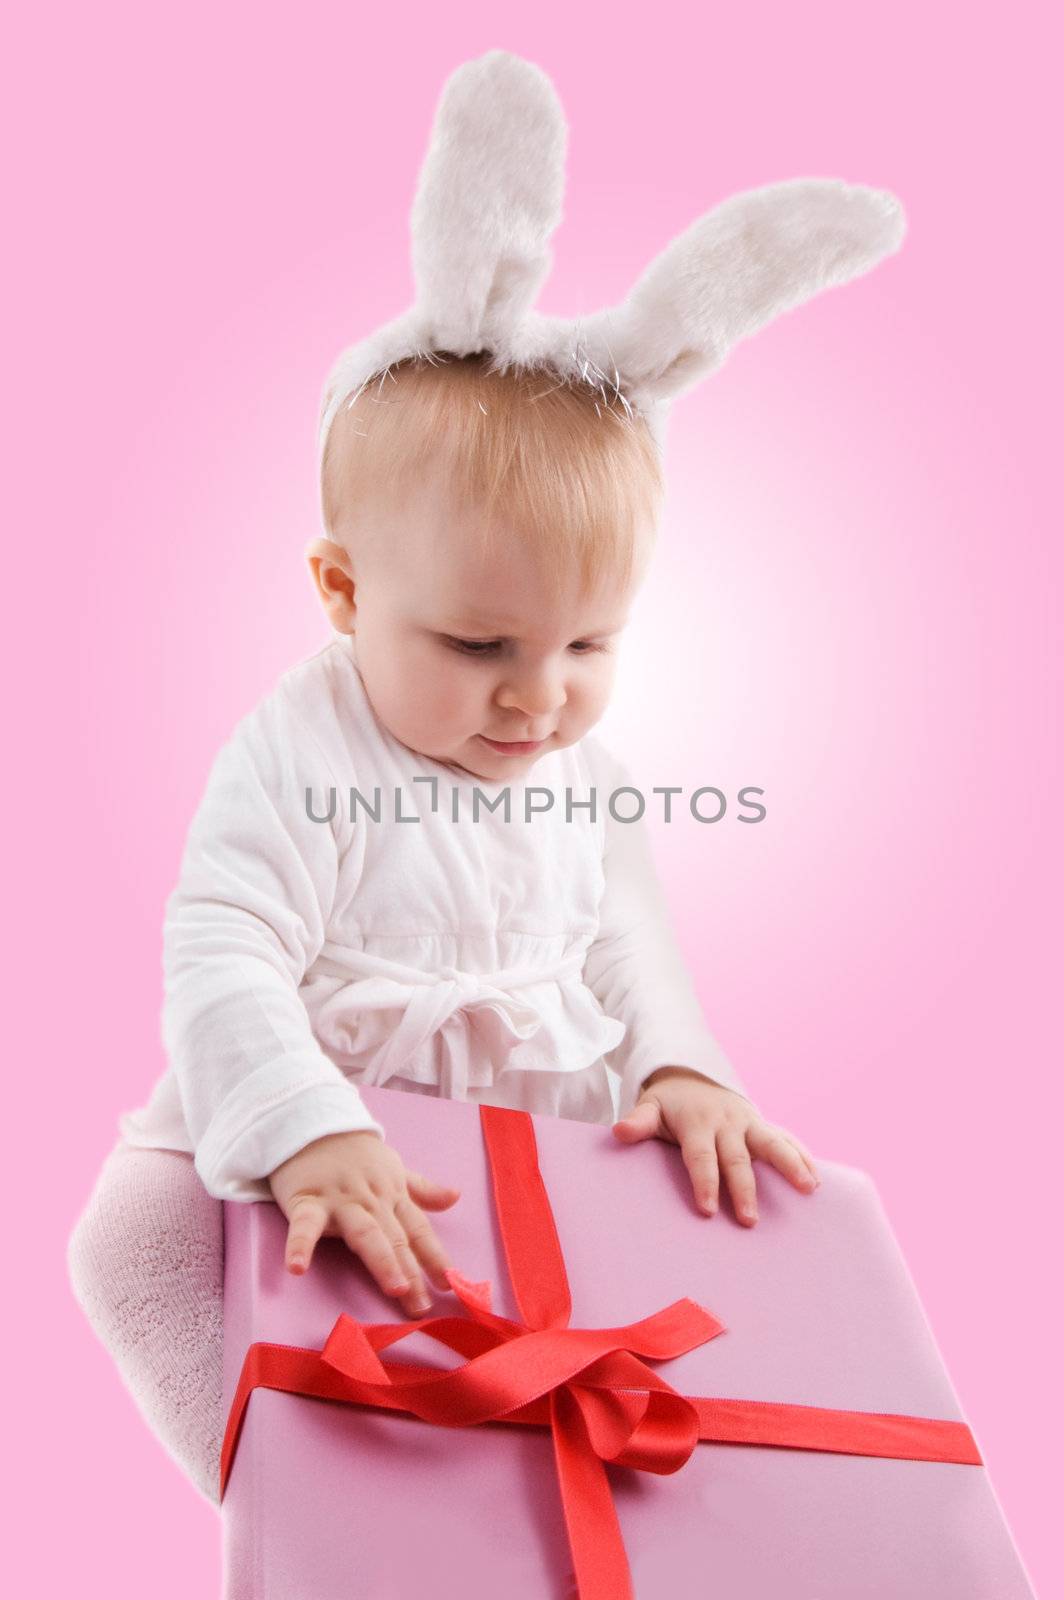 Baby in rabbit costume by Angel_a